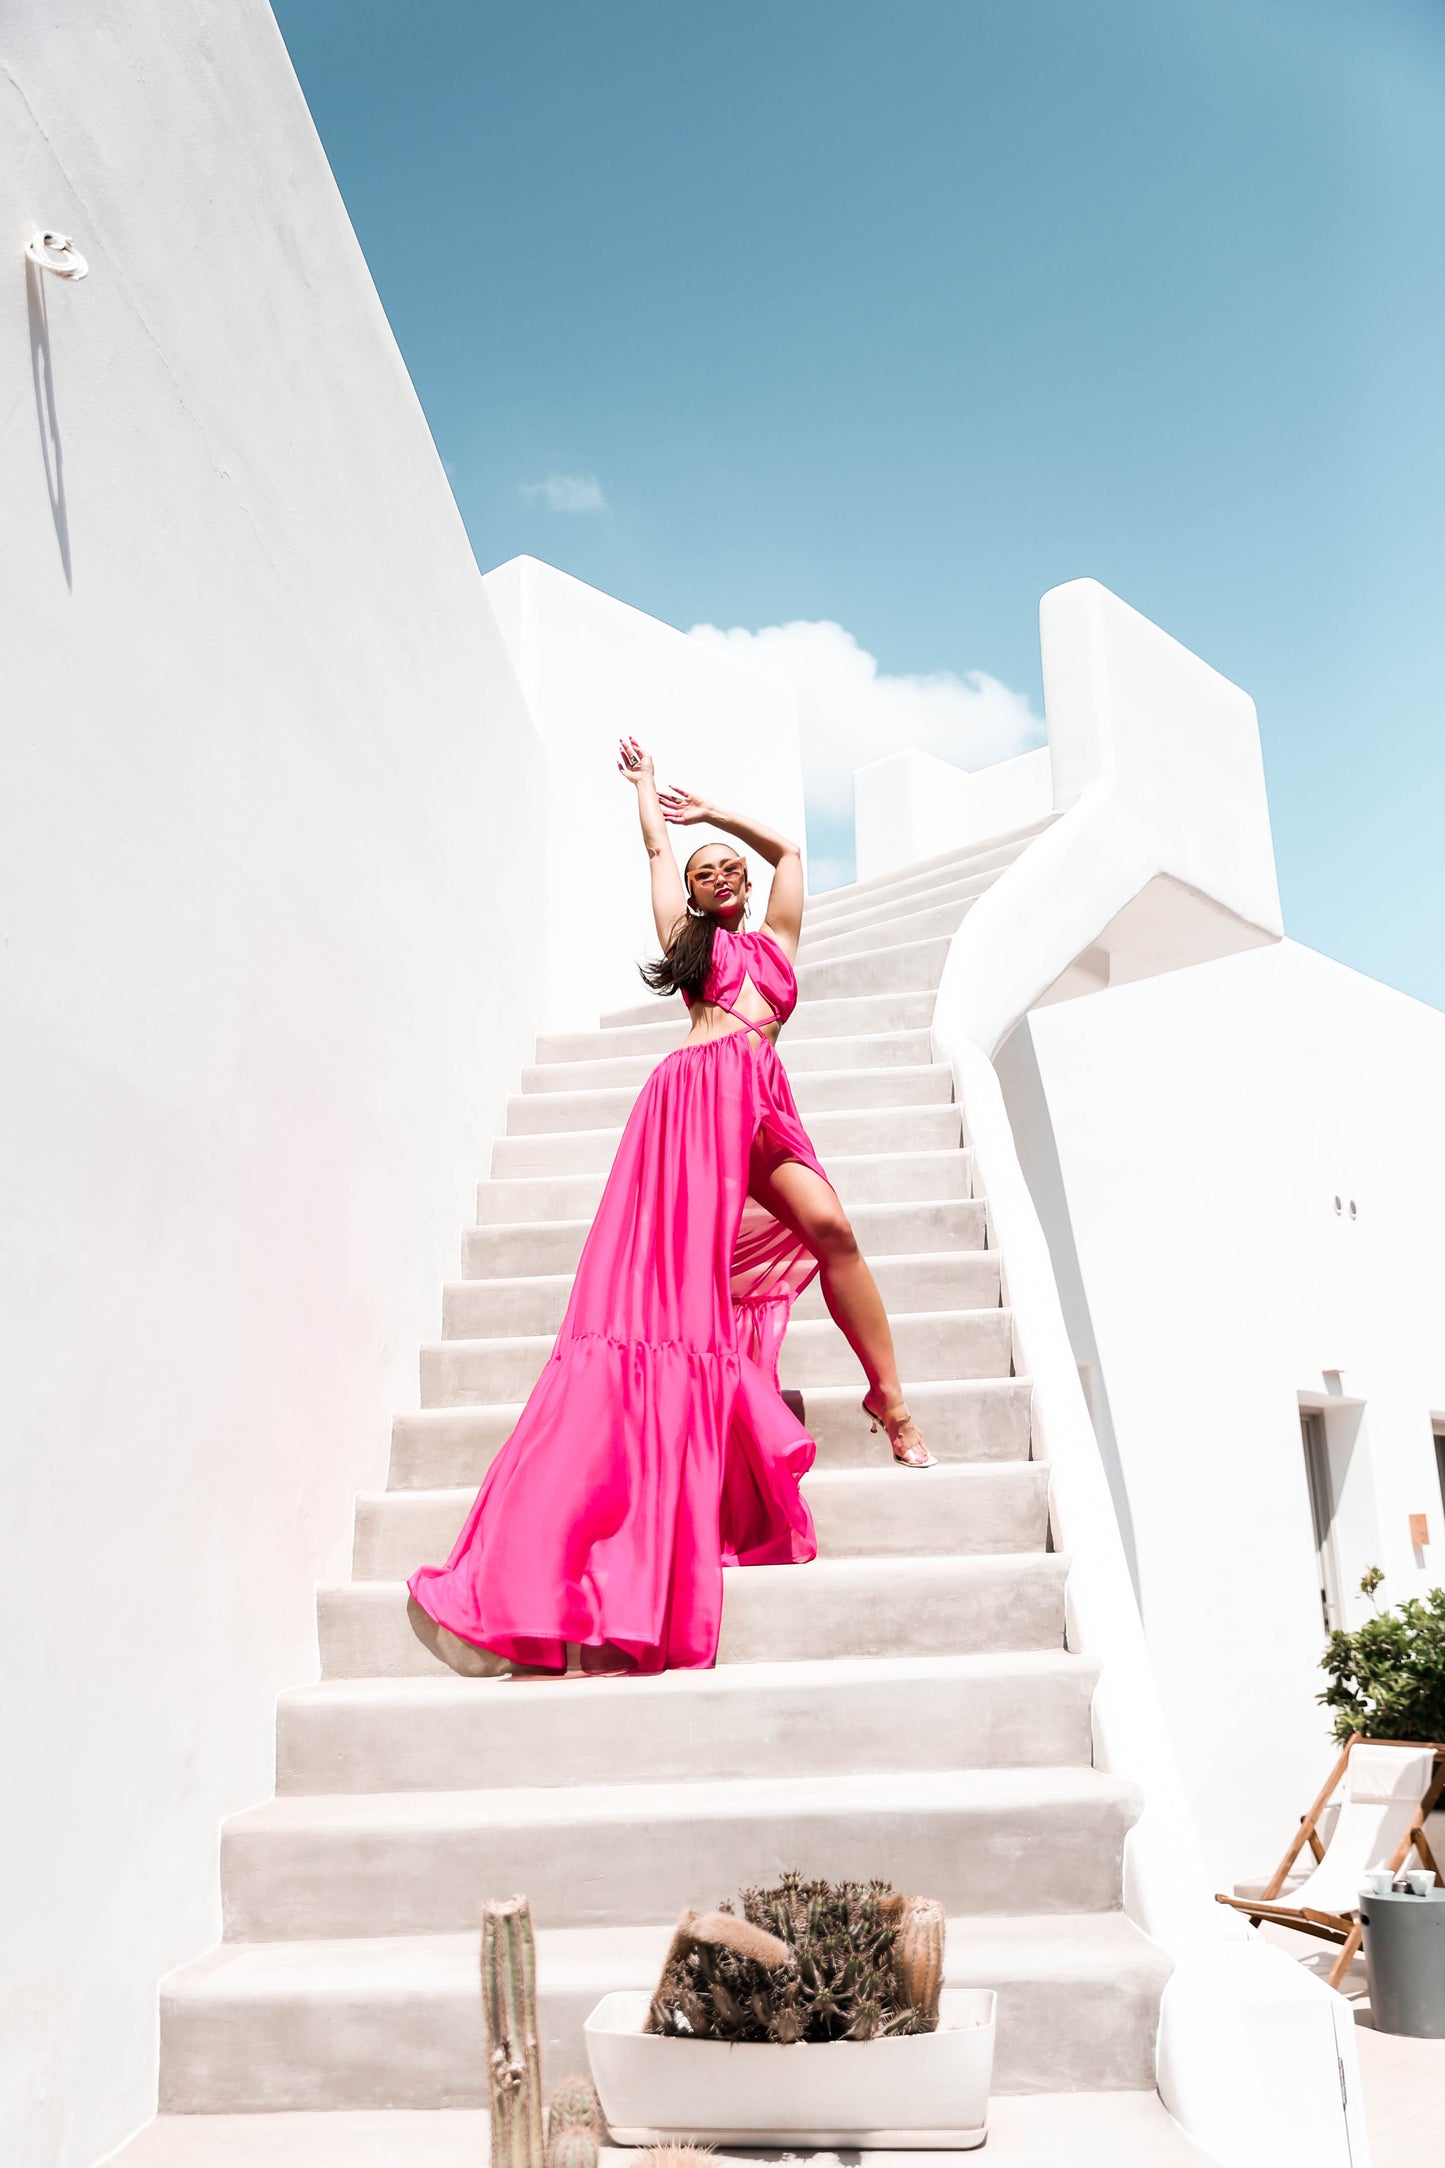 MADE TO ORDER: The Mykonos Dress (Sheer)